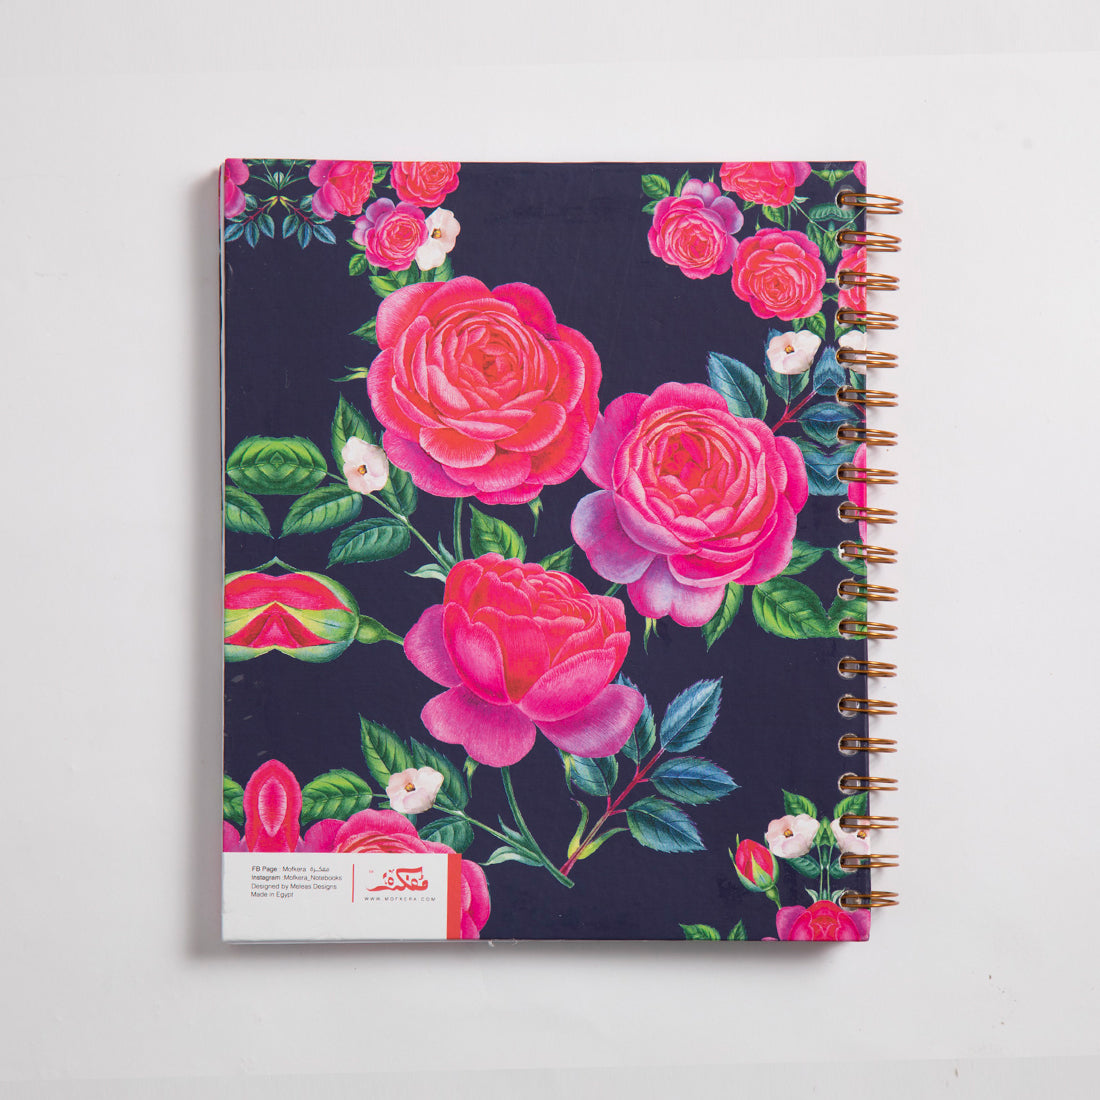 Floral (Ful Ou Yasmin) Notebook A4 Size -3 Subjects